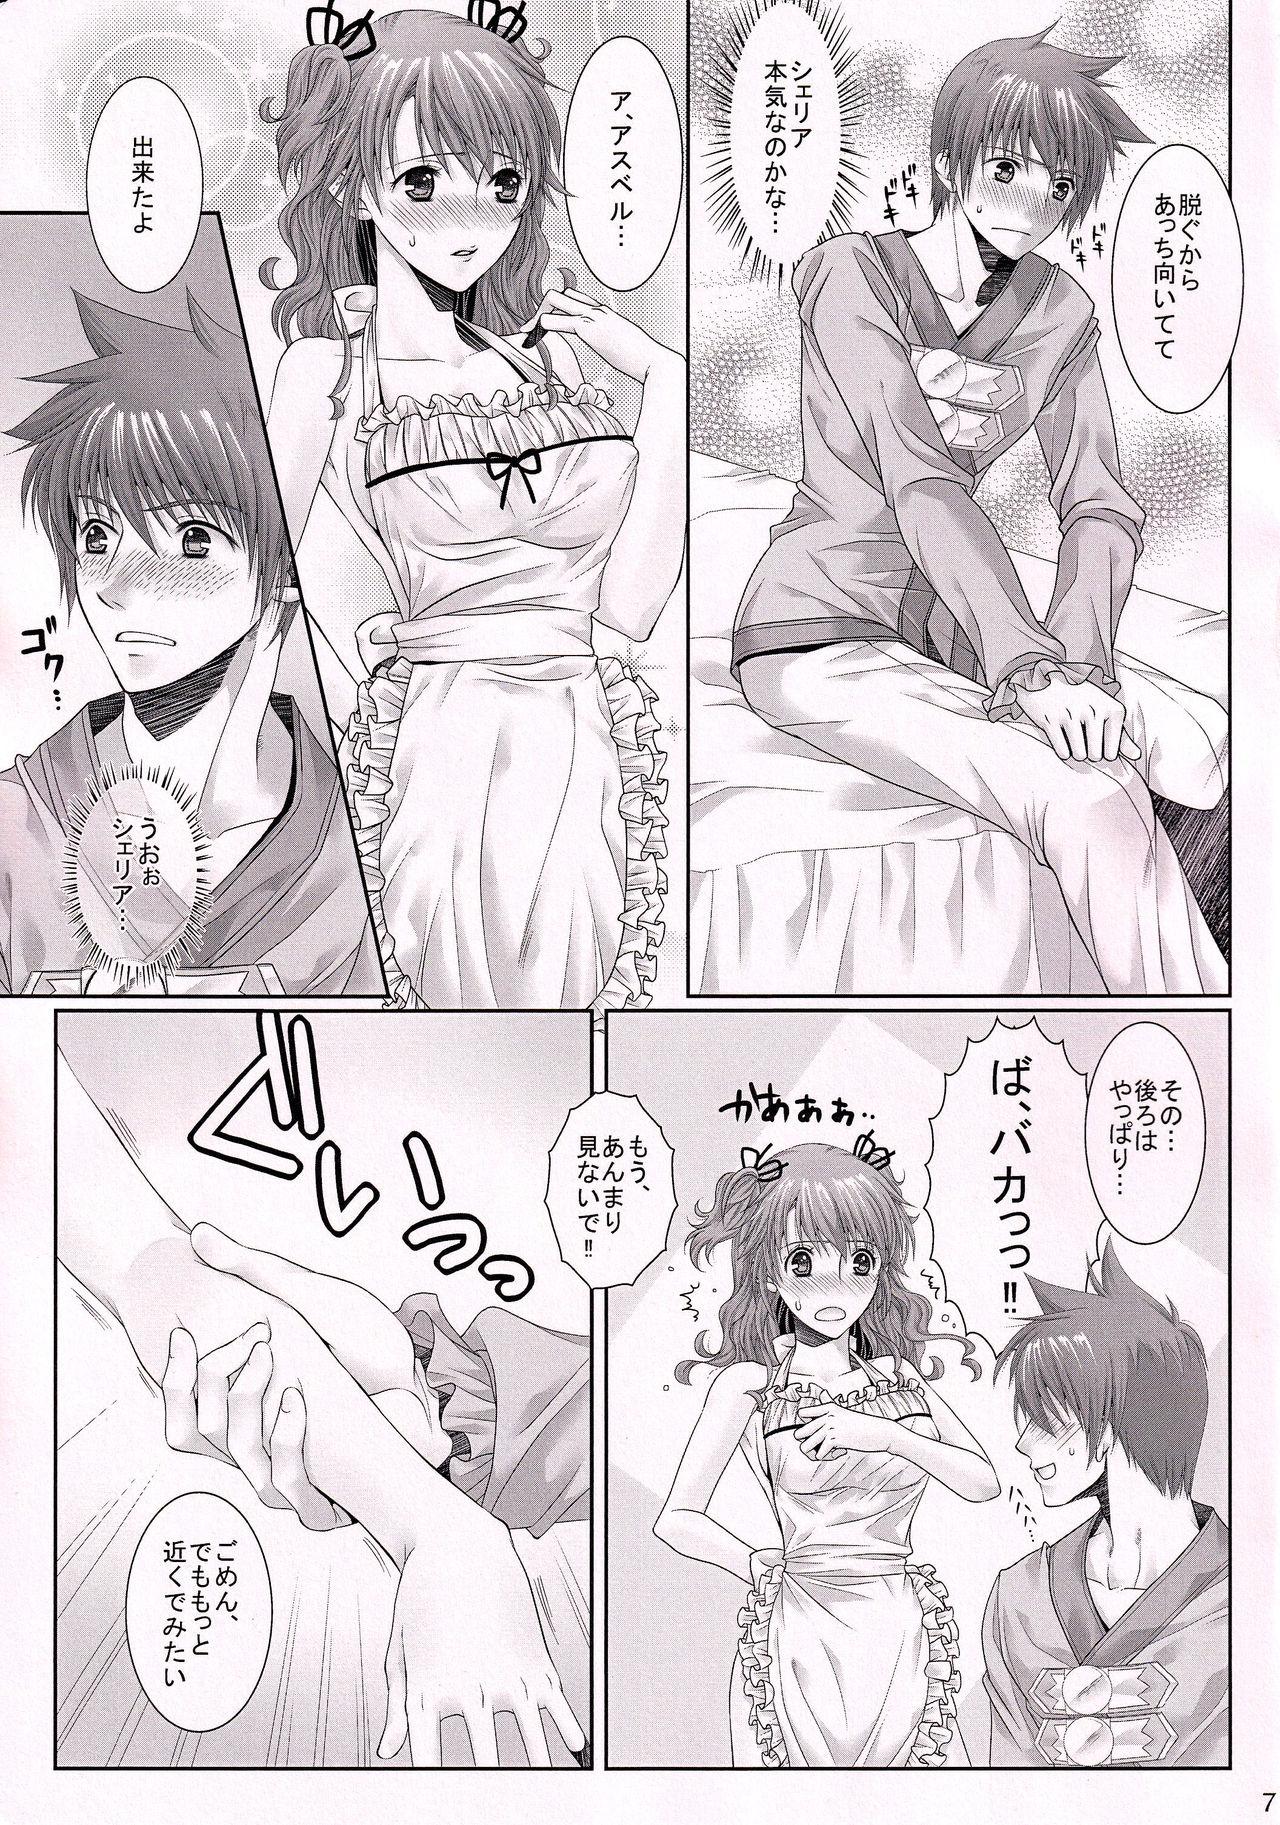 Masterbation C.C. Re recording 01 - Tales of graces Pink - Page 6